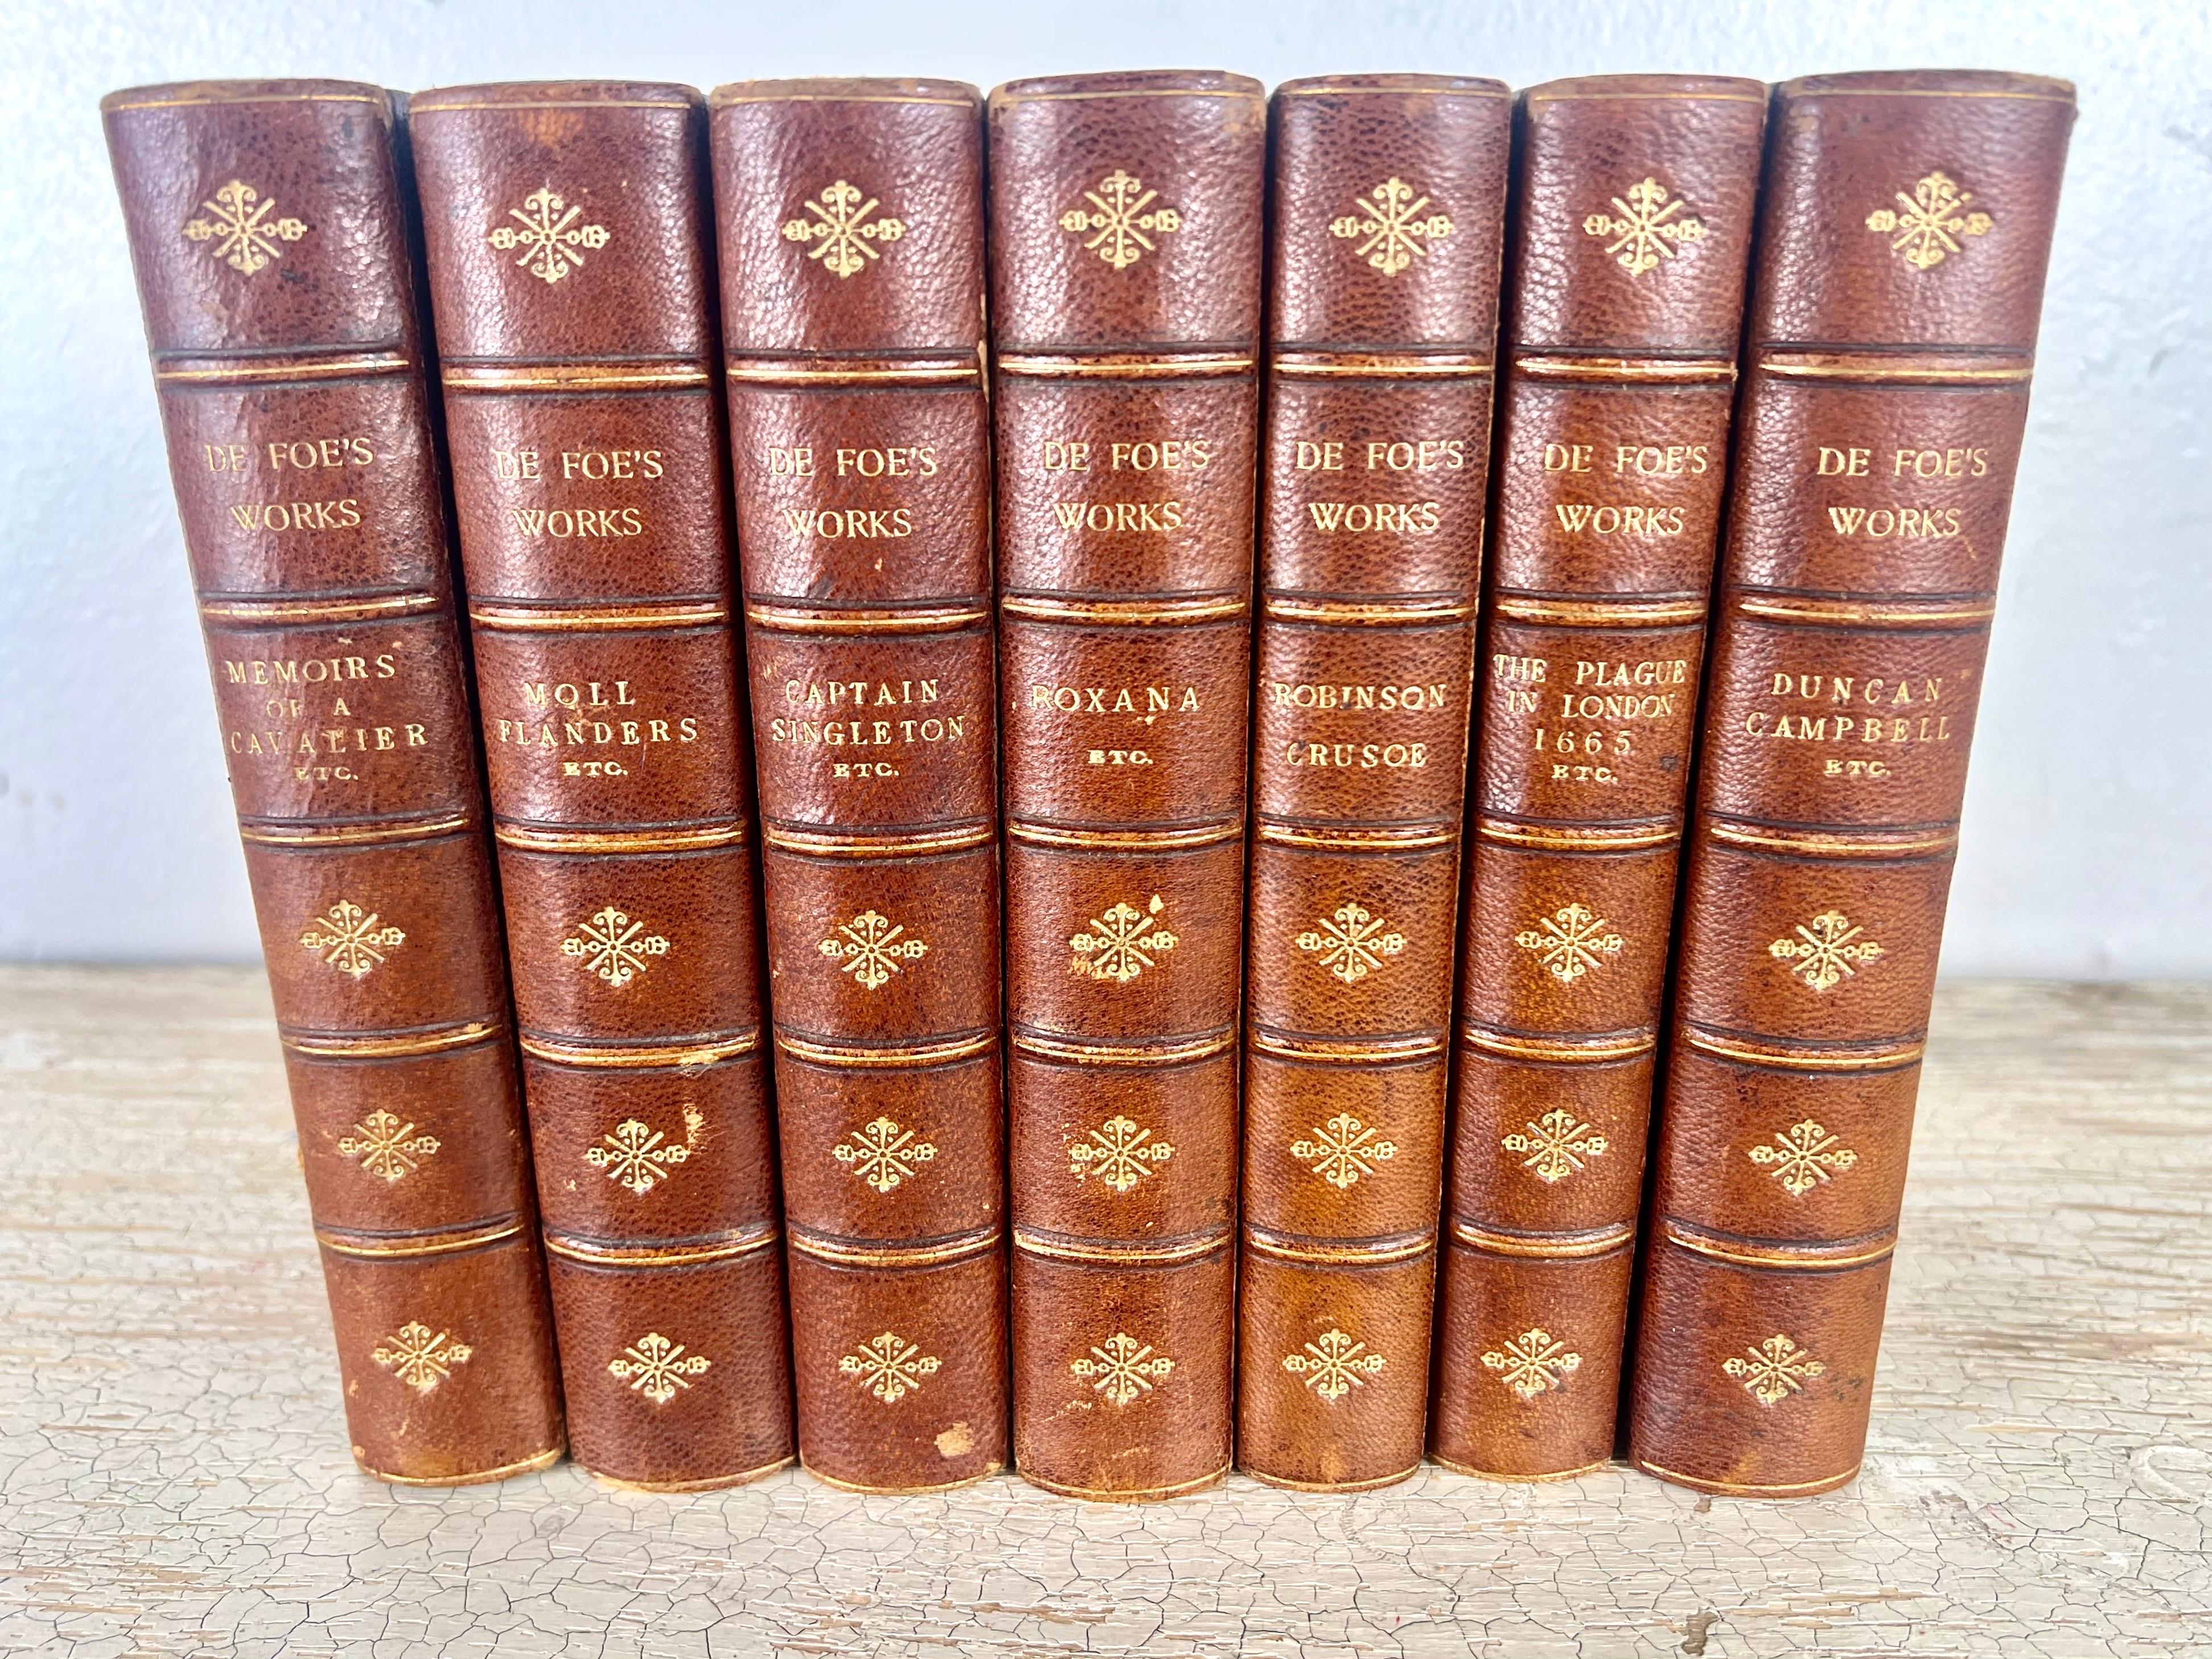 A rare set of Daniel Defoe's works published in 1878 by George Bell & son's in London.  George Bell & Sons was a reputable publisher in the 19th century, known for producing high-quality literary works.

The set was published in 1878 which is later